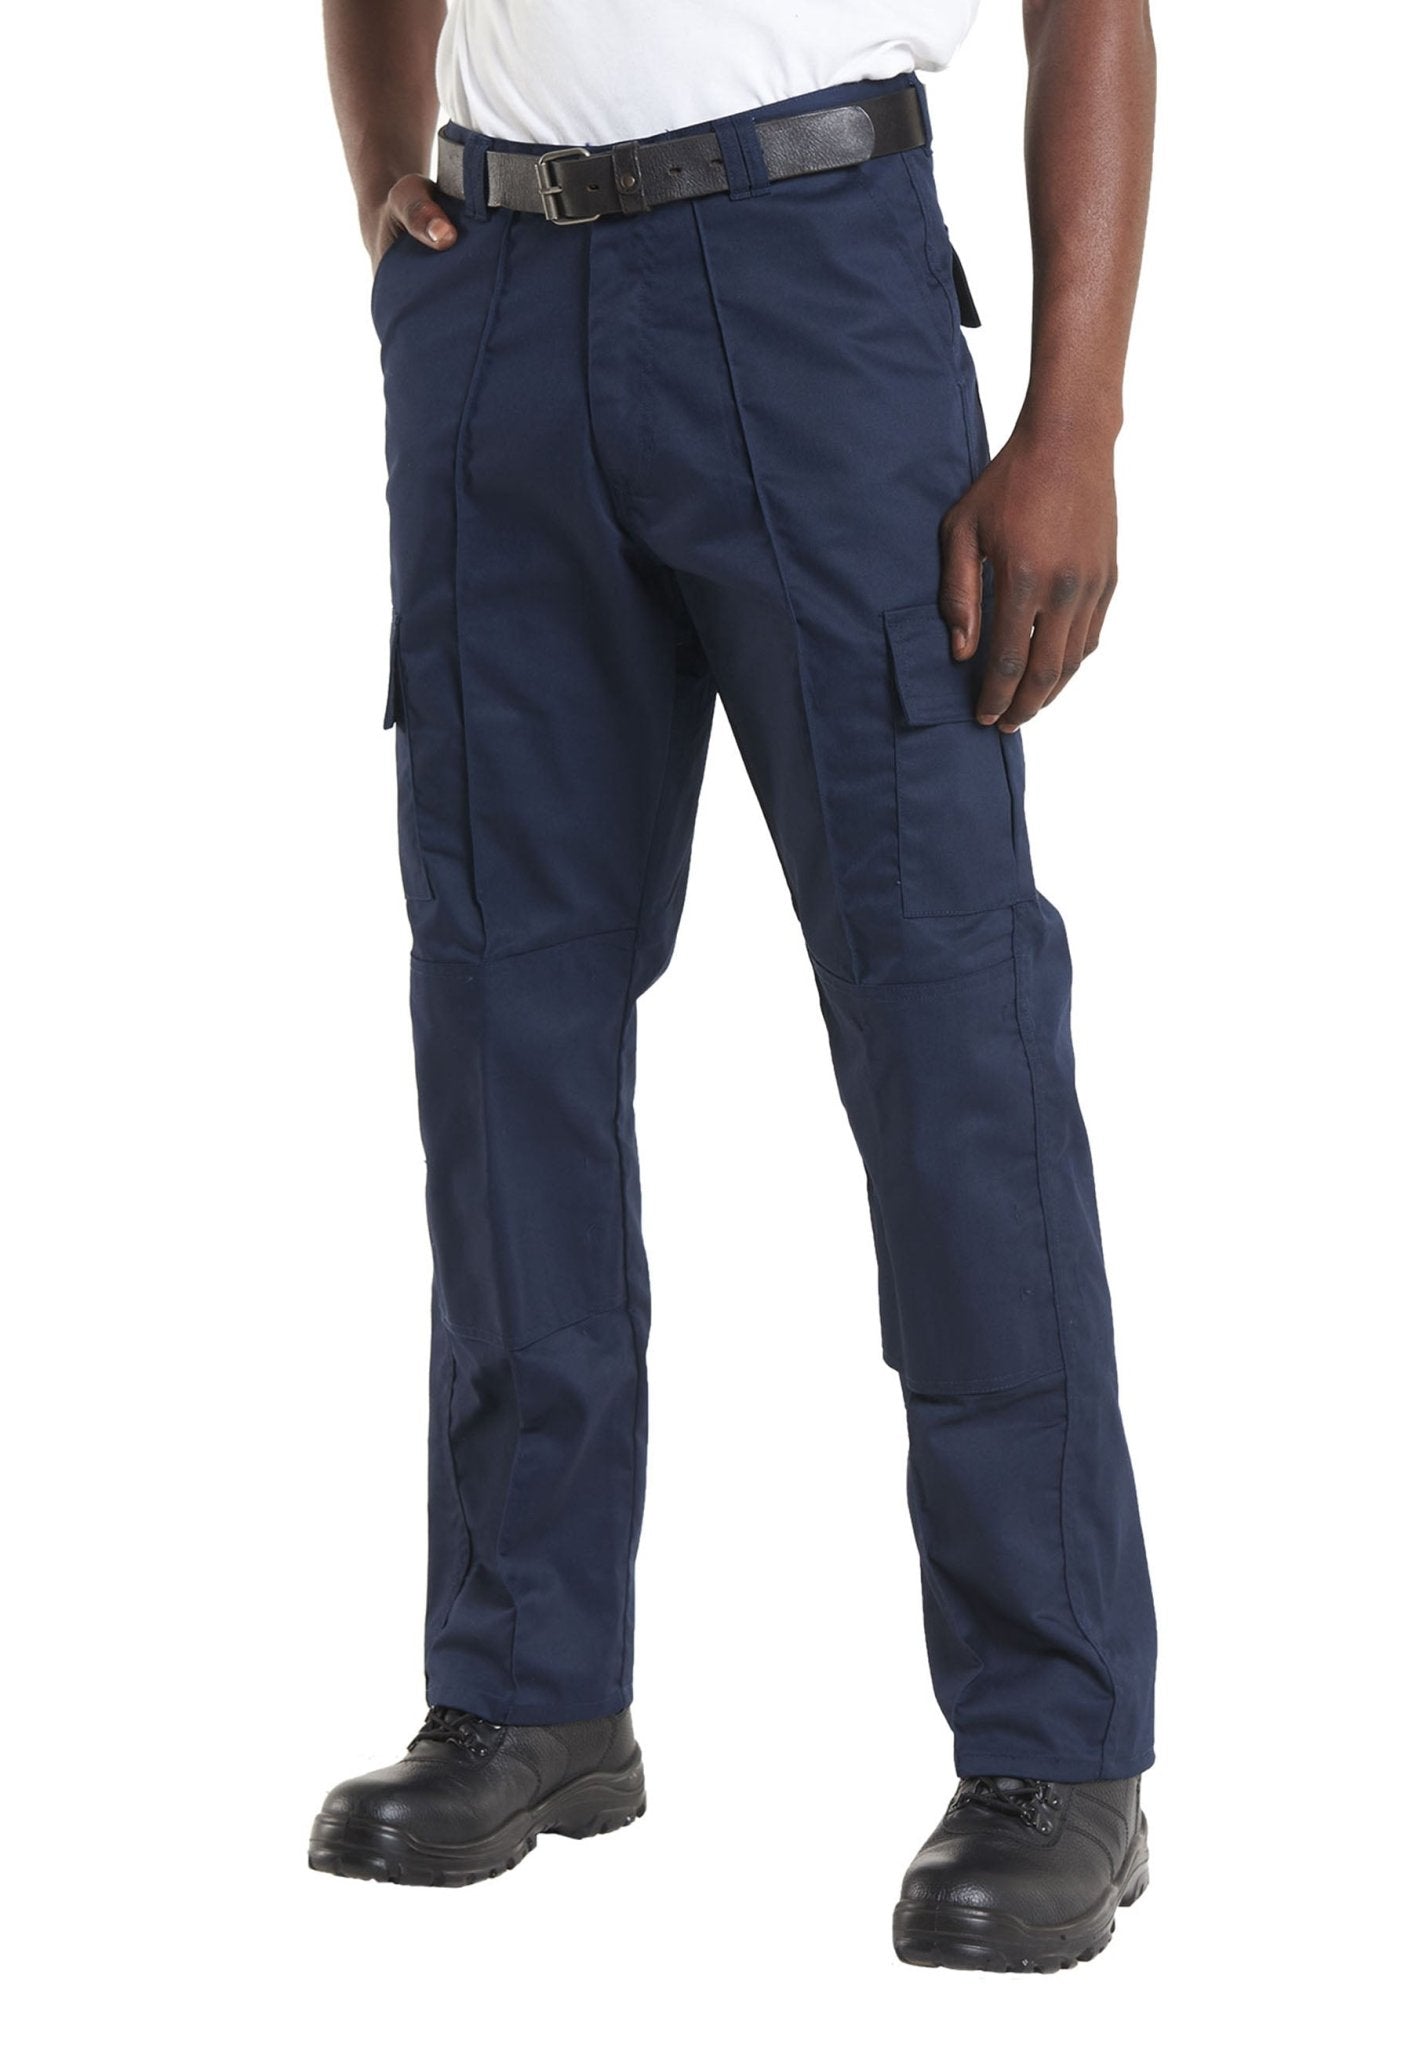 Cargo Trouser with Knee Pad Pockets - The Work Uniform Company